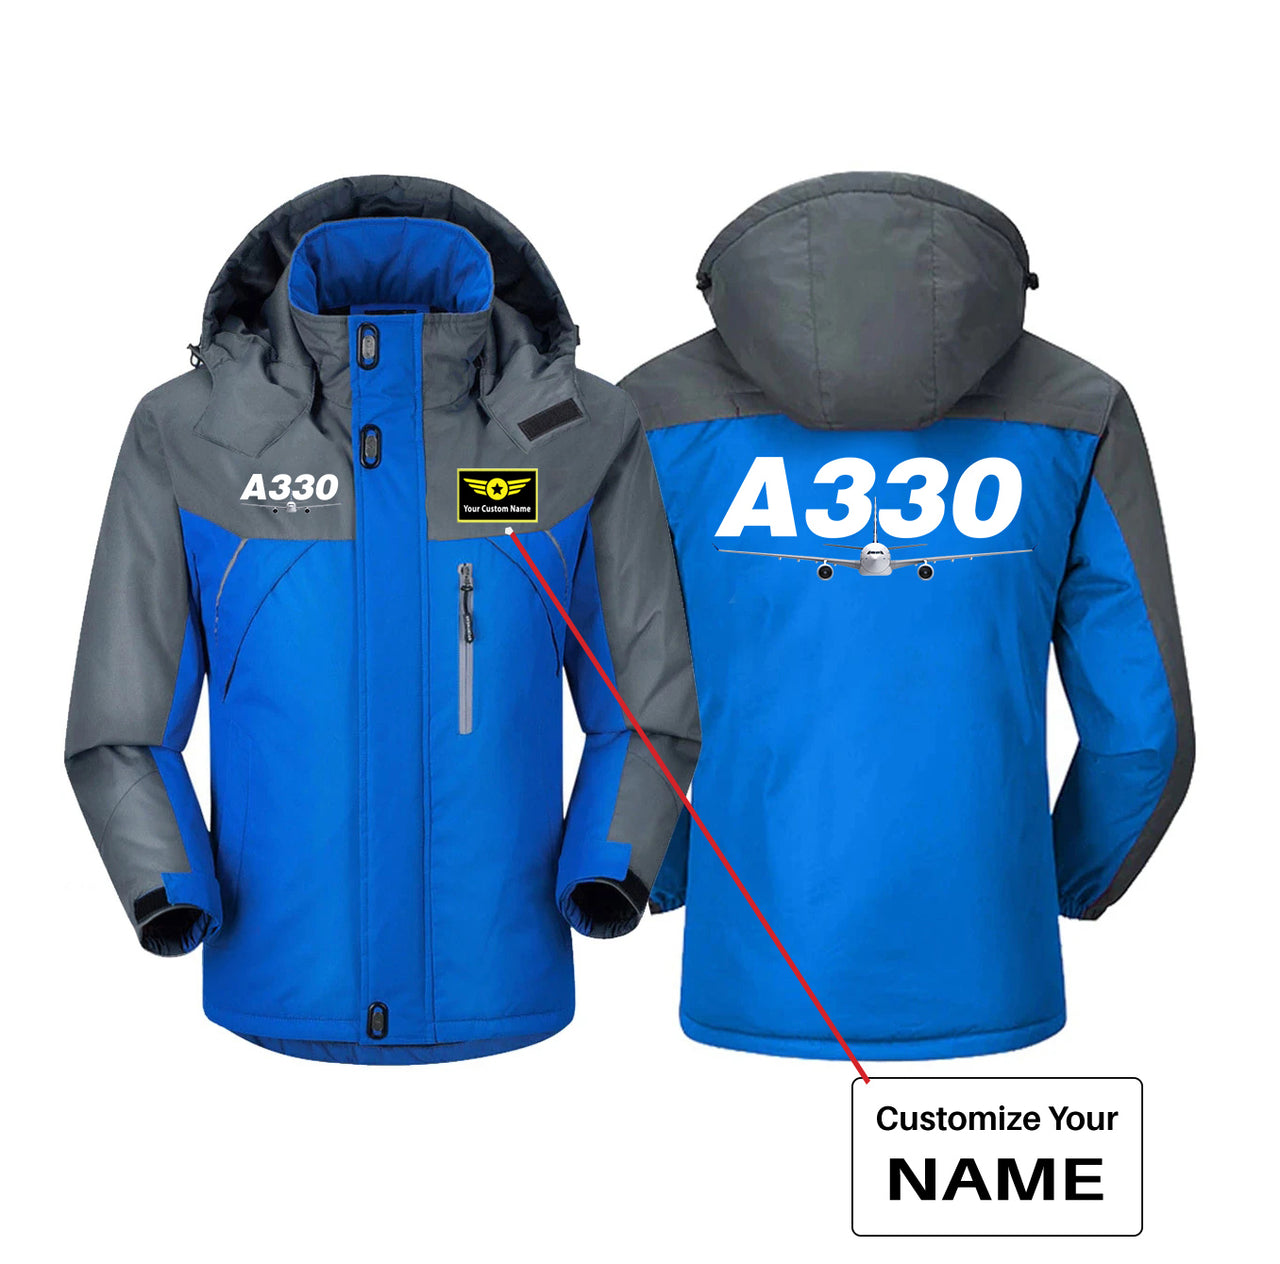 Super Airbus A330 Designed Thick Winter Jackets